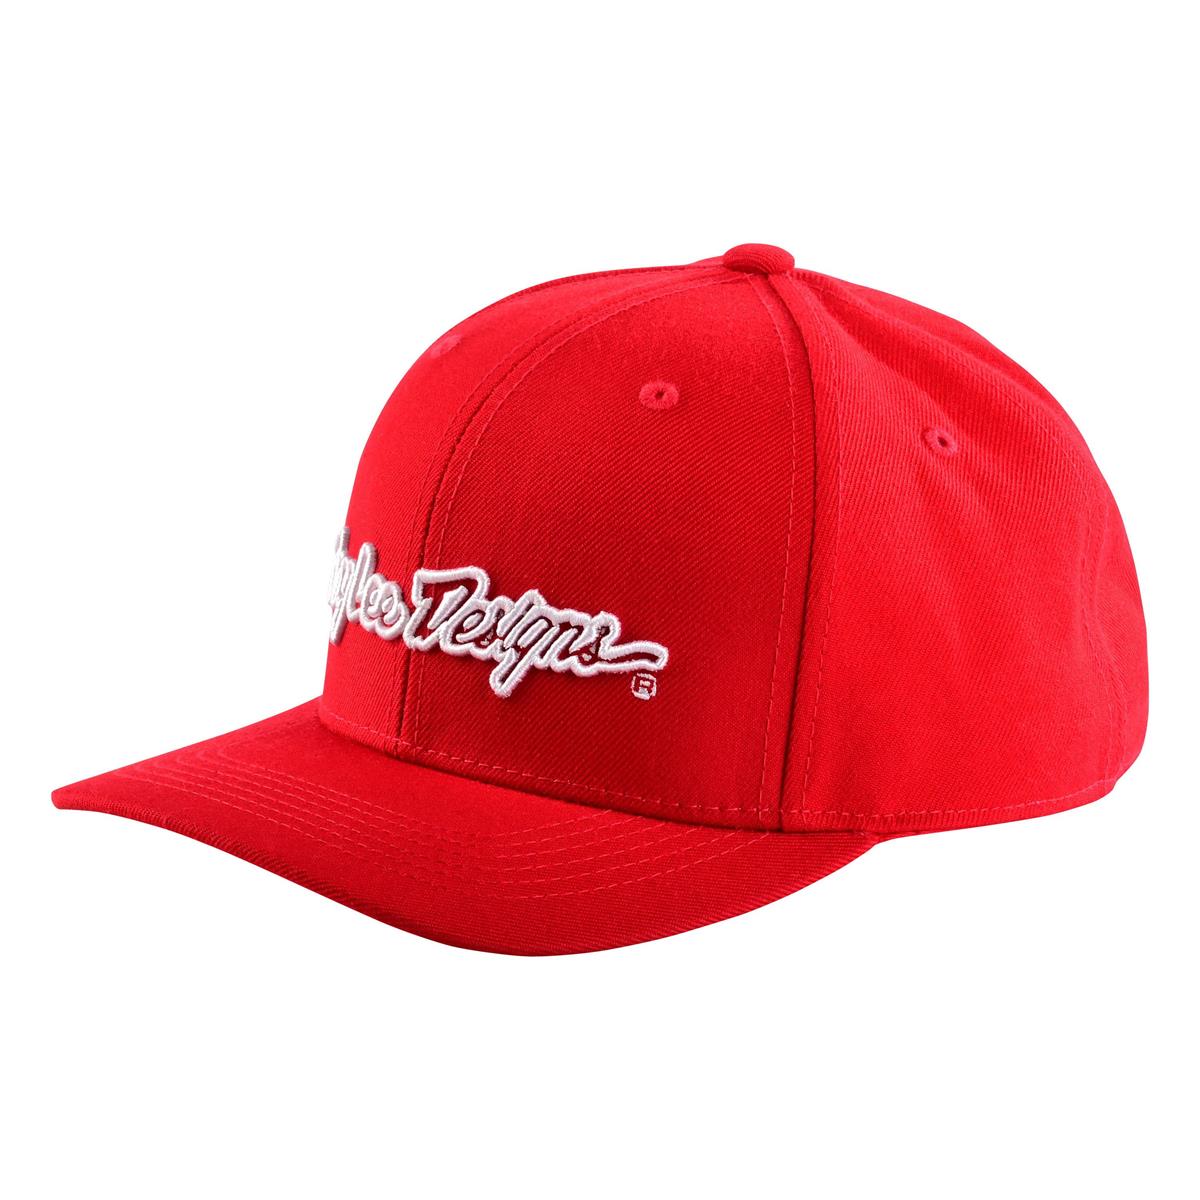 Troy Lee Designs 9Fifty Snapback Cap Signature Rot/Weiß